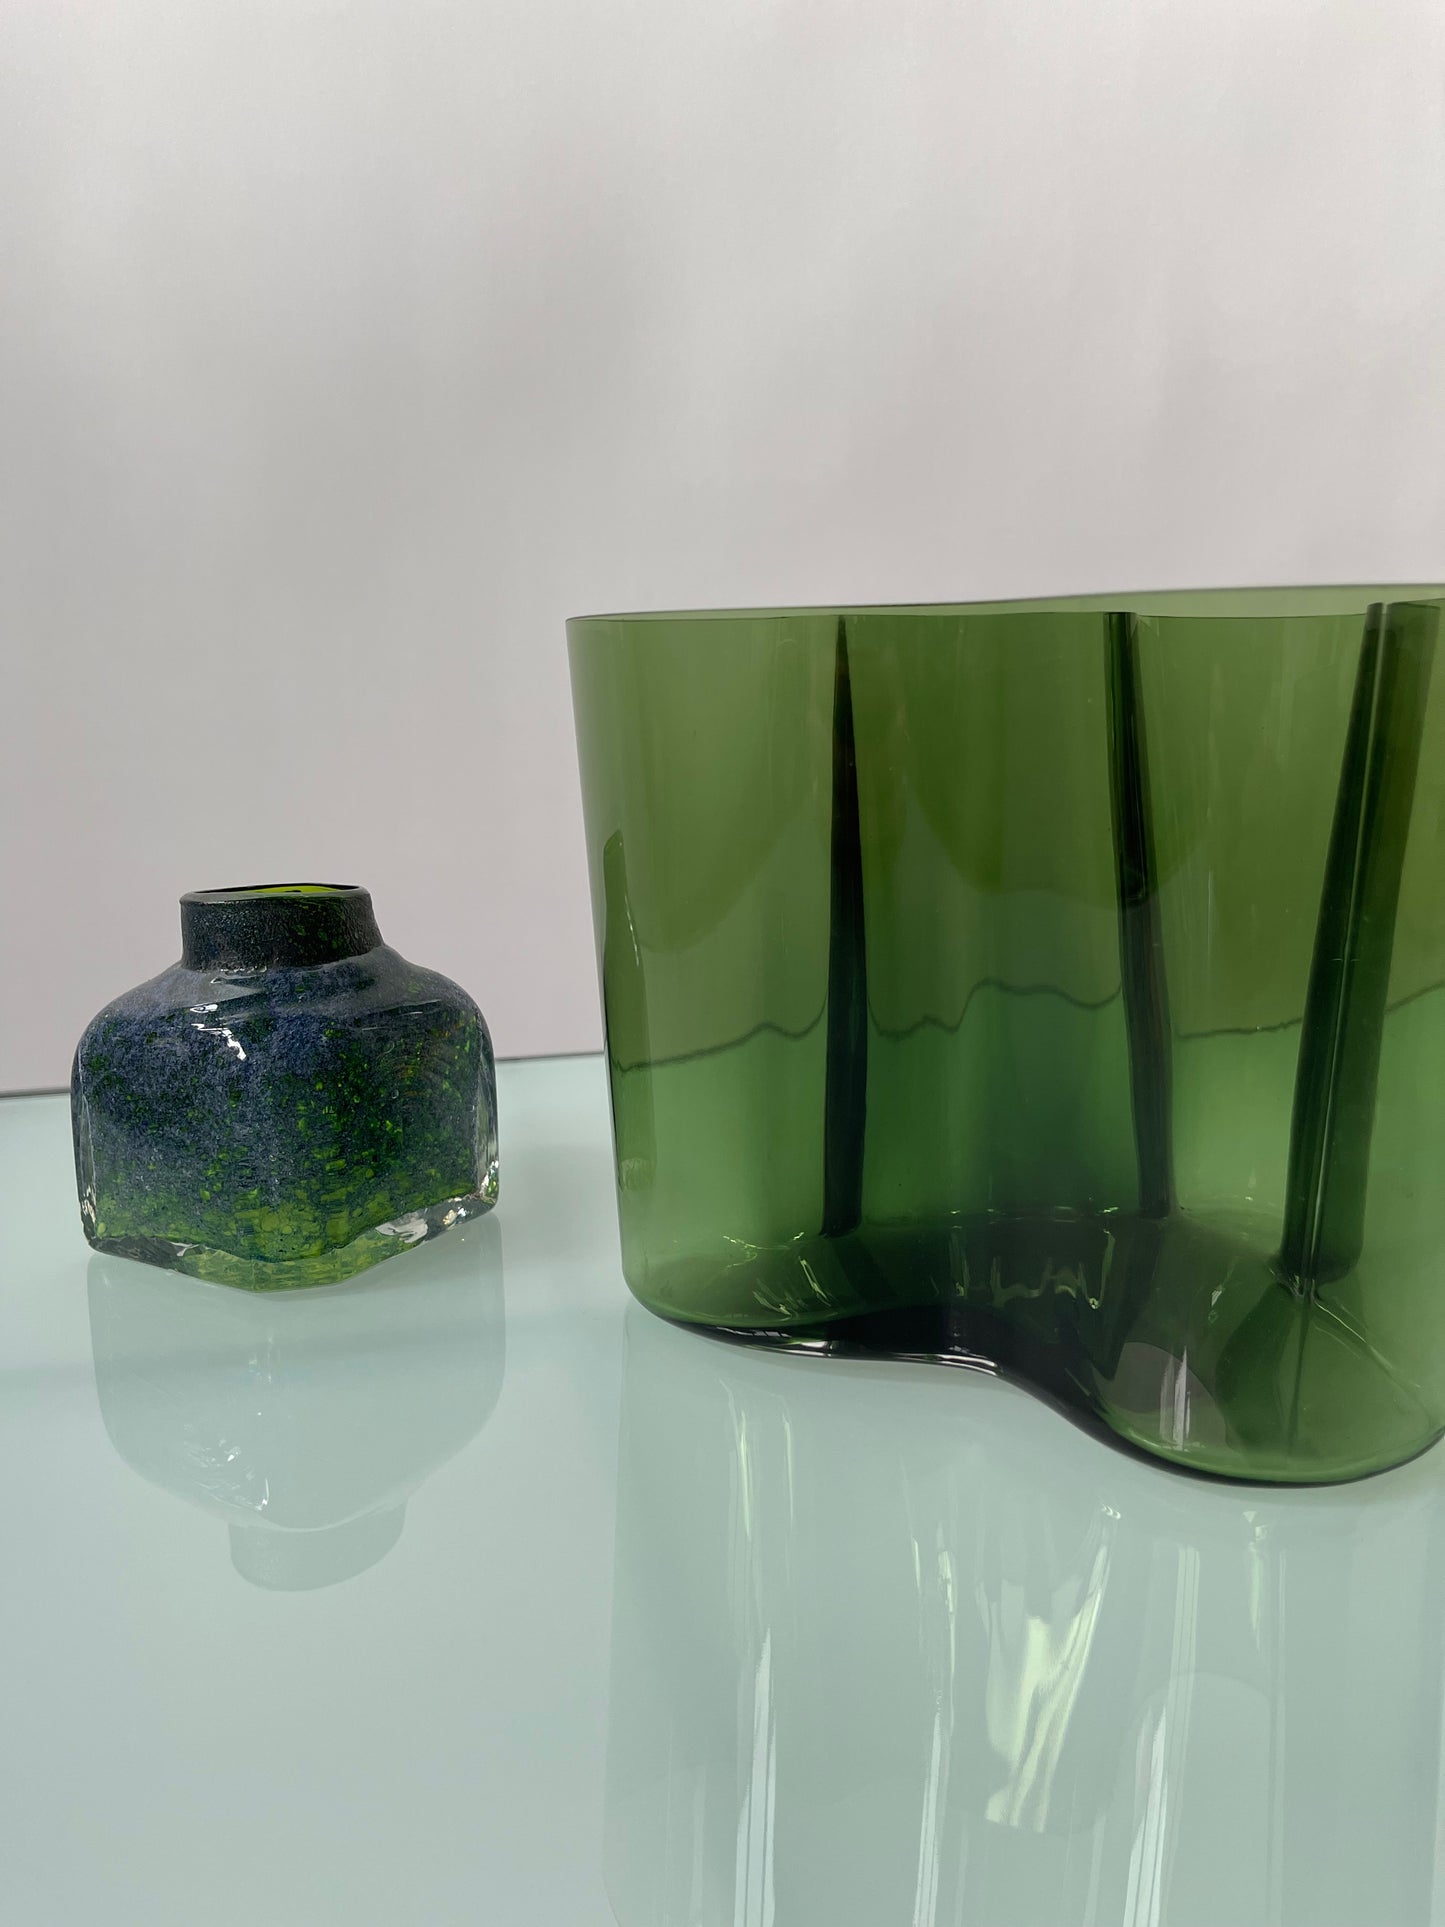 Savoy Limited Edition 50th Anniversary Vase by Alvar Aalto for Littala, 1986